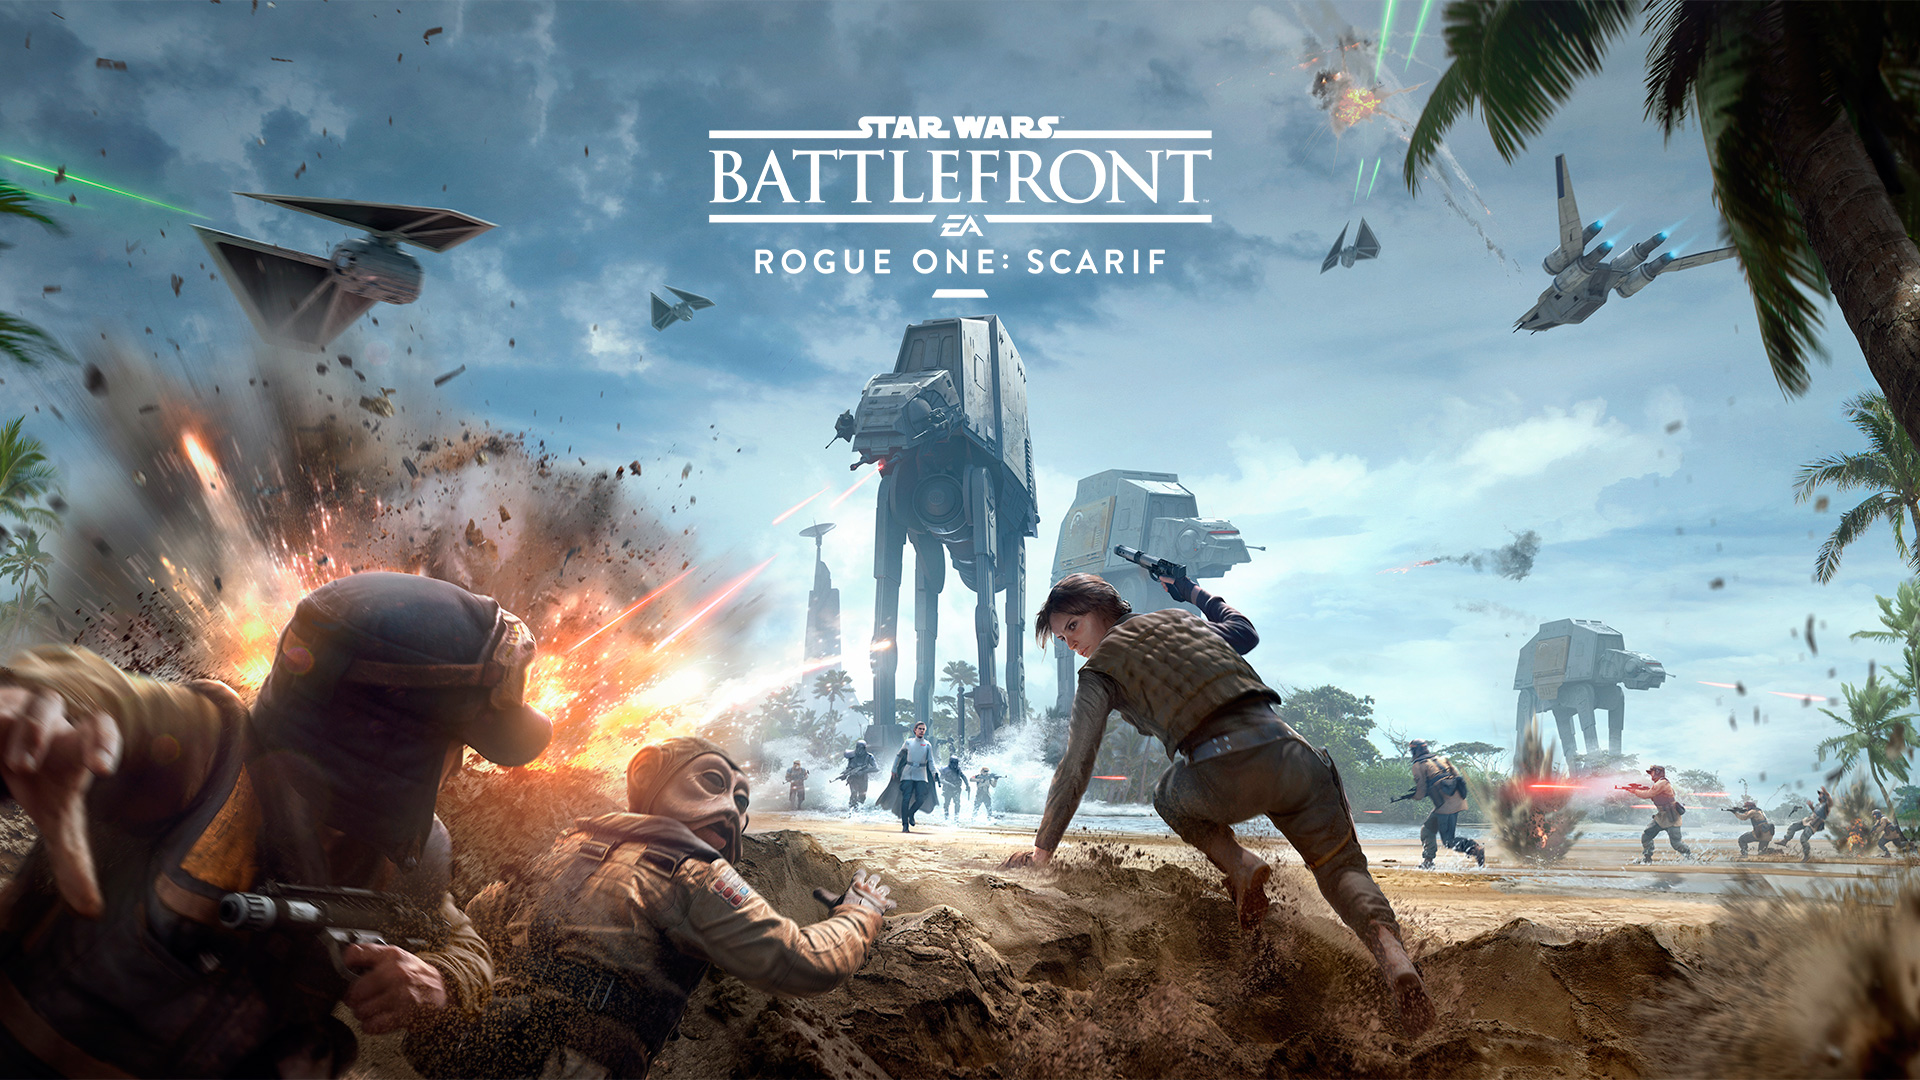 Media asset in full size related to 3dfxzone.it news item entitled as follows: EA annuncia Star Wars Battlefront: Ultimate Edition e il DLC Rogue One: Scarif | Image Name: news25273_star-wars-battlefront-rogue-one-scarif-dlc-screenshot_1.jpg